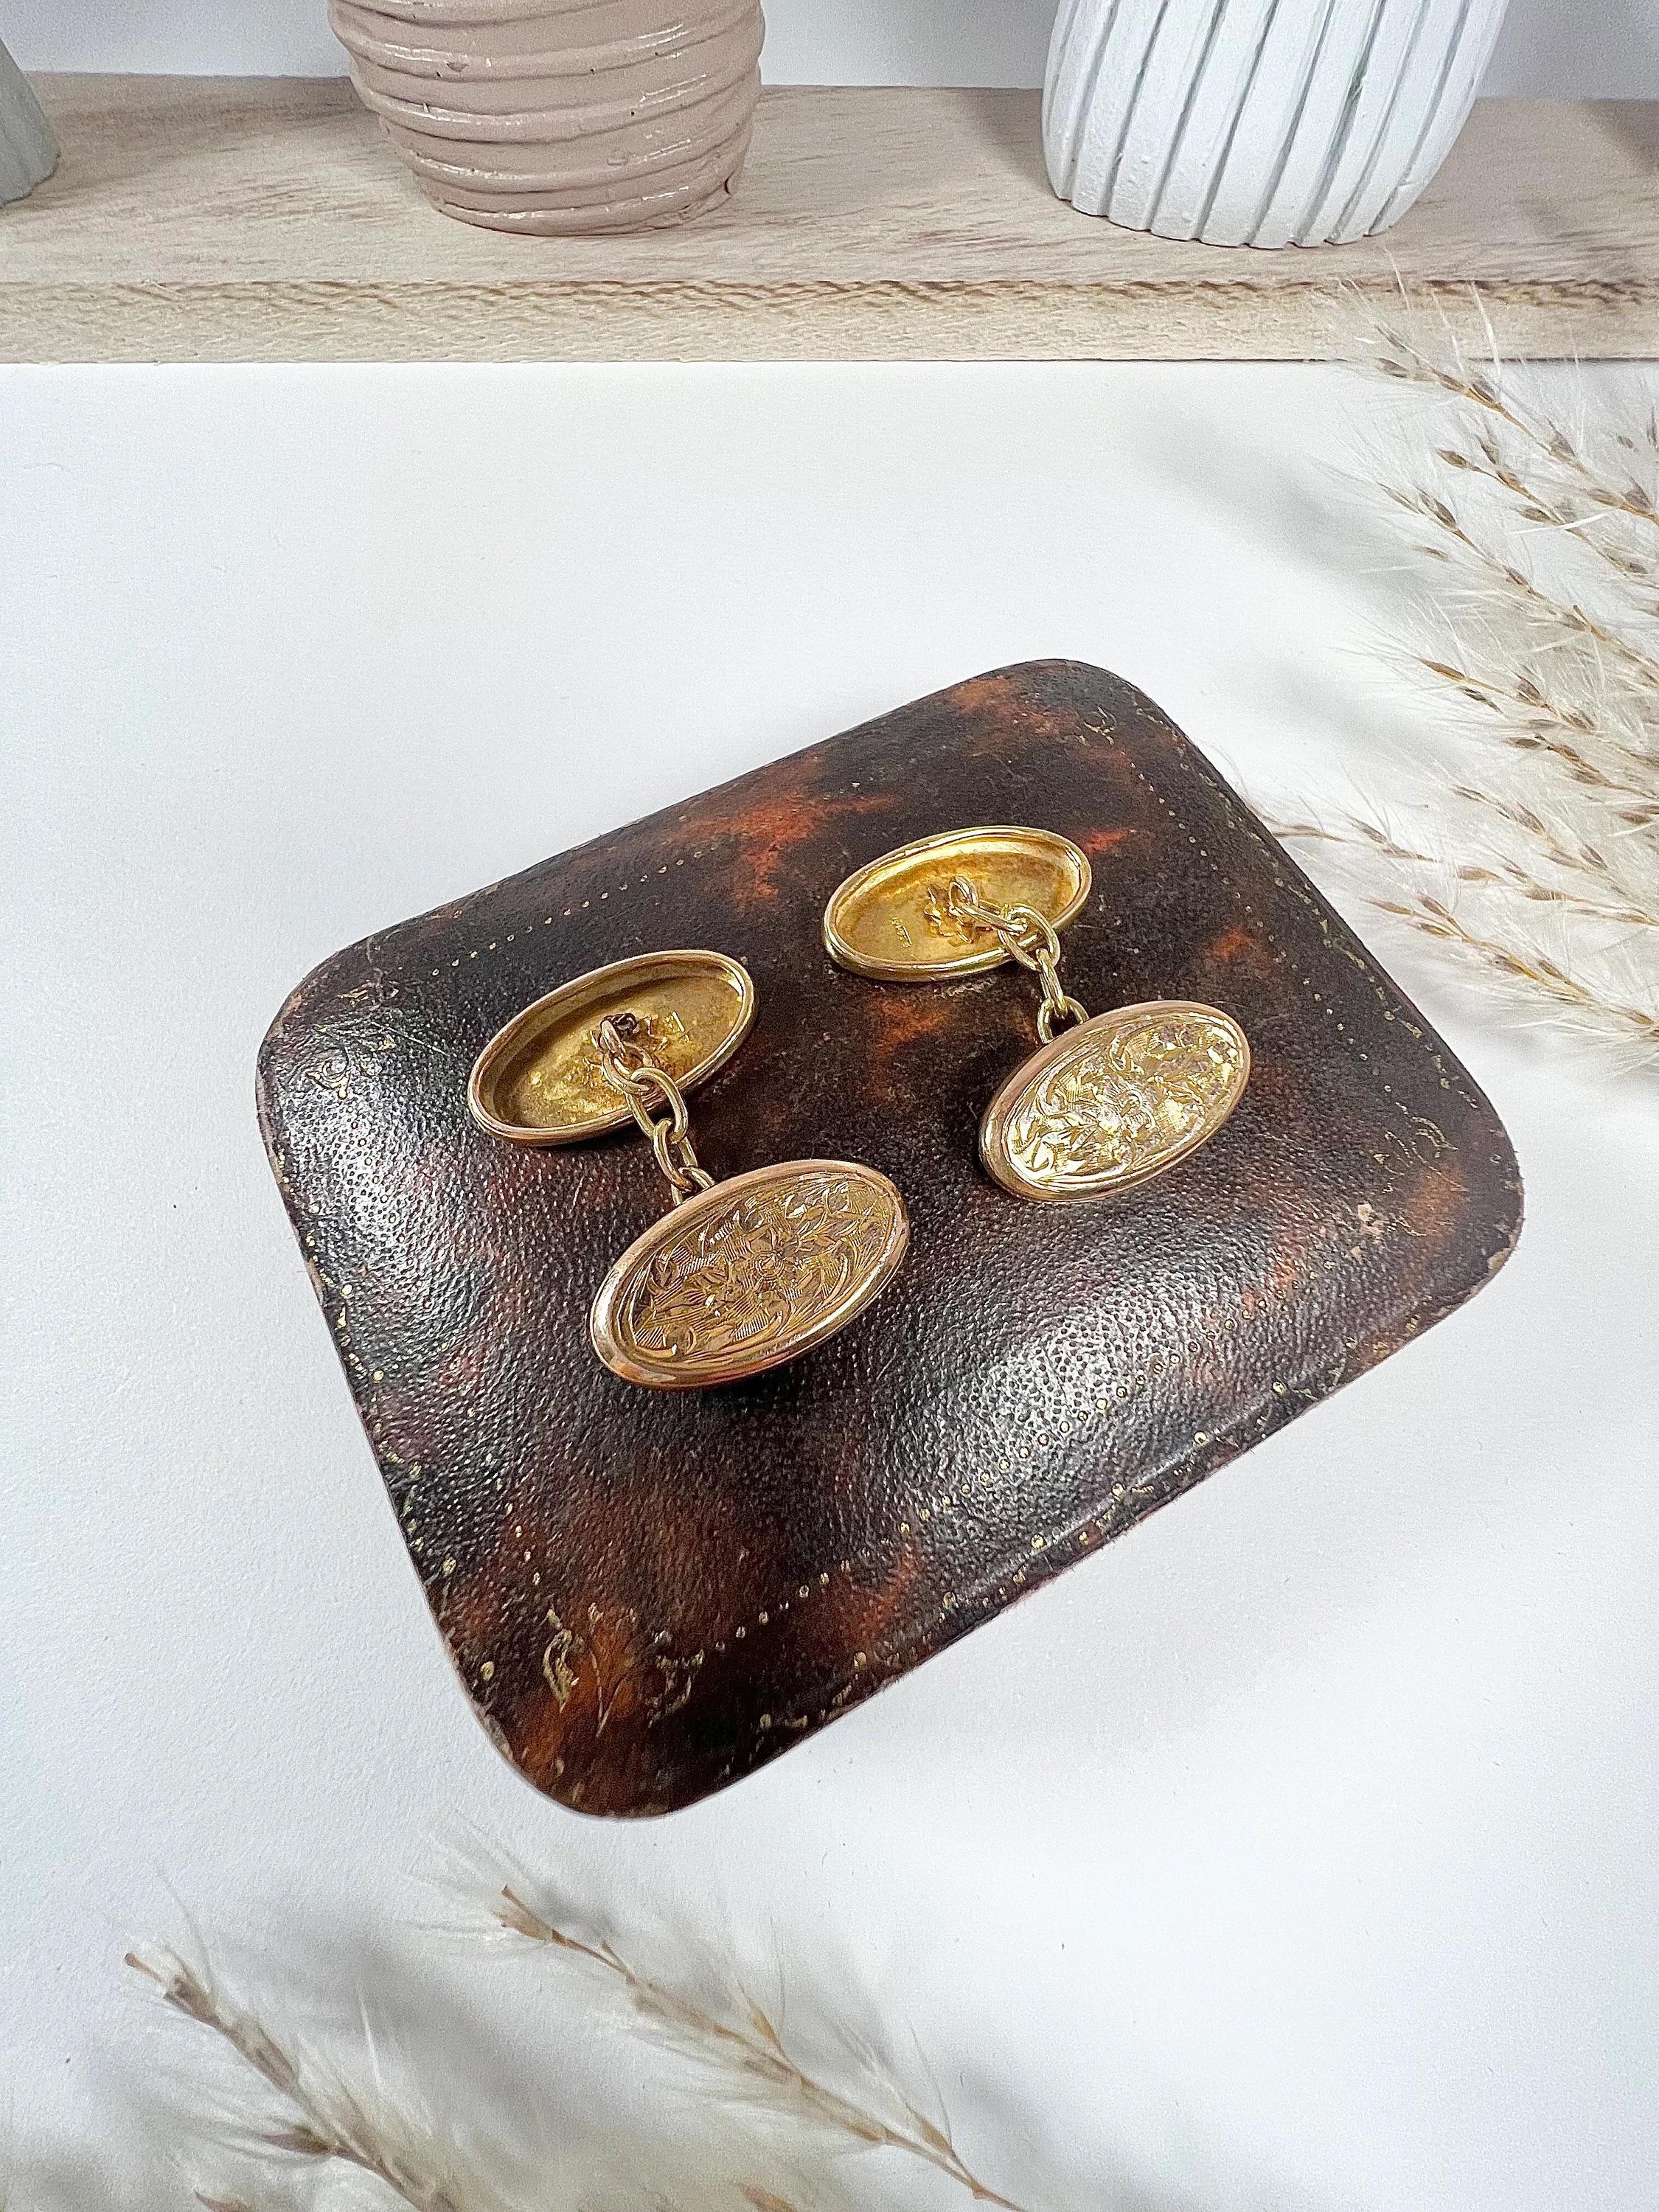 Antique Cufflinks 

9ct Gold Stamped 

Hallmarked Birmingham 1922

Fabulous, yellow gold, oval shaped cufflinks. Beautifully decorated on both sides with a pretty floral, engraved pattern. Both cufflinks are fully hallmarked & stamped 9ct gold.